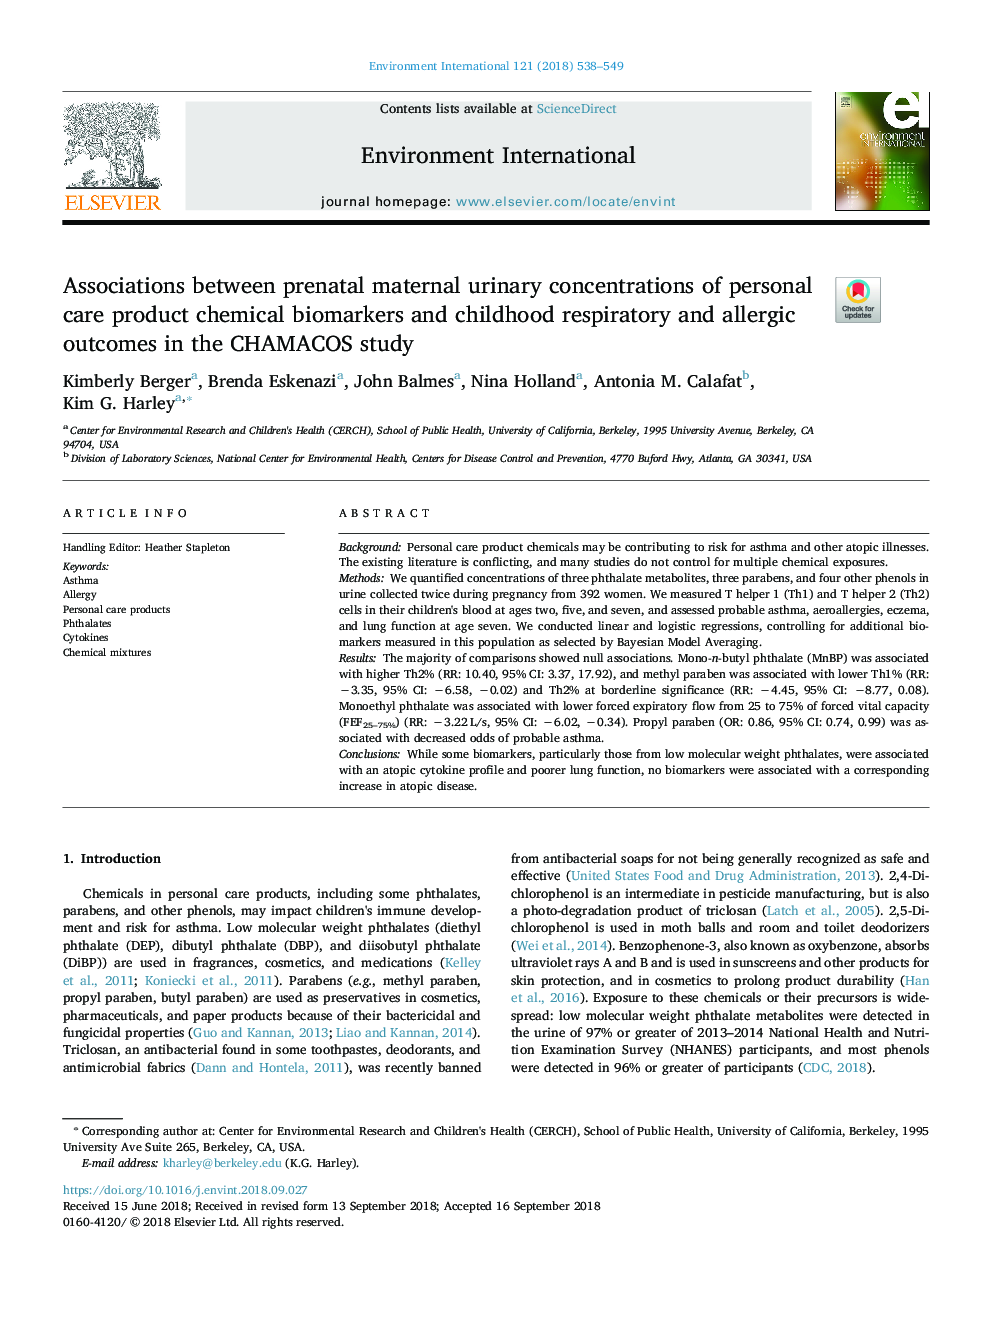 Associations between prenatal maternal urinary concentrations of personal care product chemical biomarkers and childhood respiratory and allergic outcomes in the CHAMACOS study